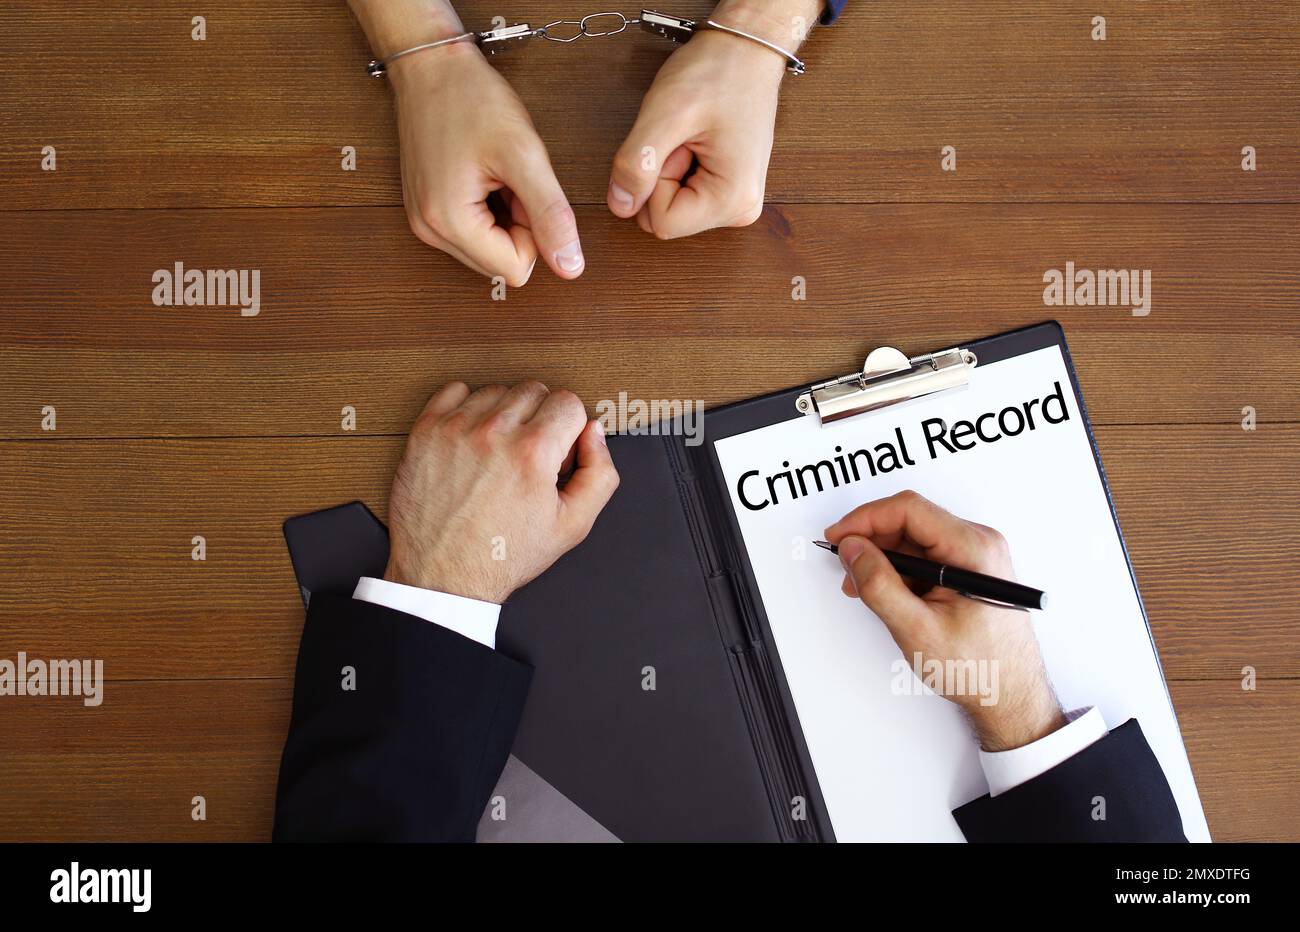 Police officer examining criminal record at desk, top view Stock Photo